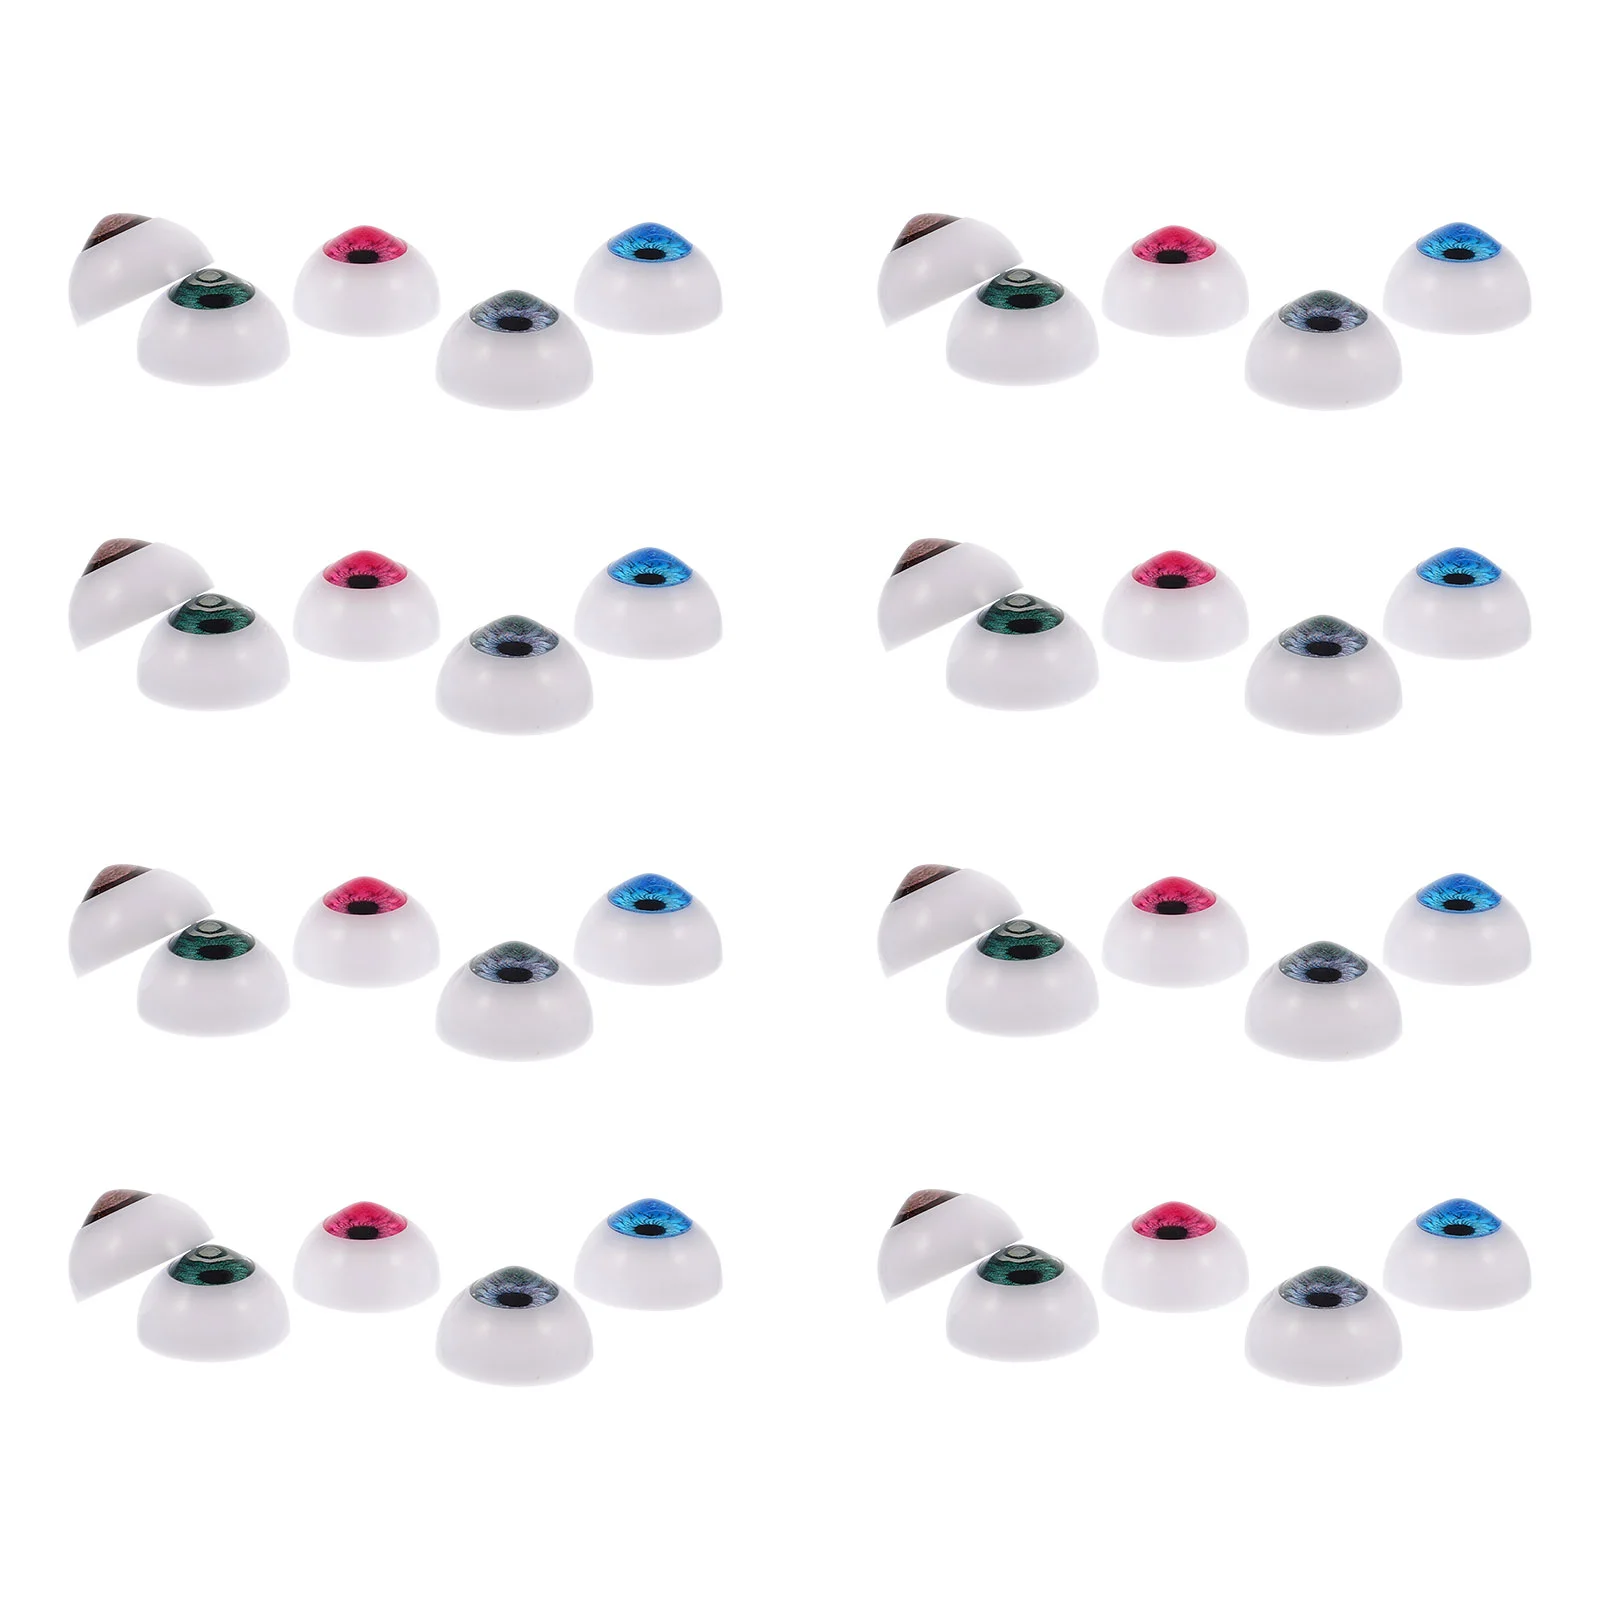 50 Pcs Decor Artificial Eyes DIY Material Halloween Props Realistic Acrylic Eyeball Eyeballs Craft Supplies Crafts professional 12 18 24 36 colors acrylic paint set 12ml hand painted wall drawing craft painting pigment set for art supplies